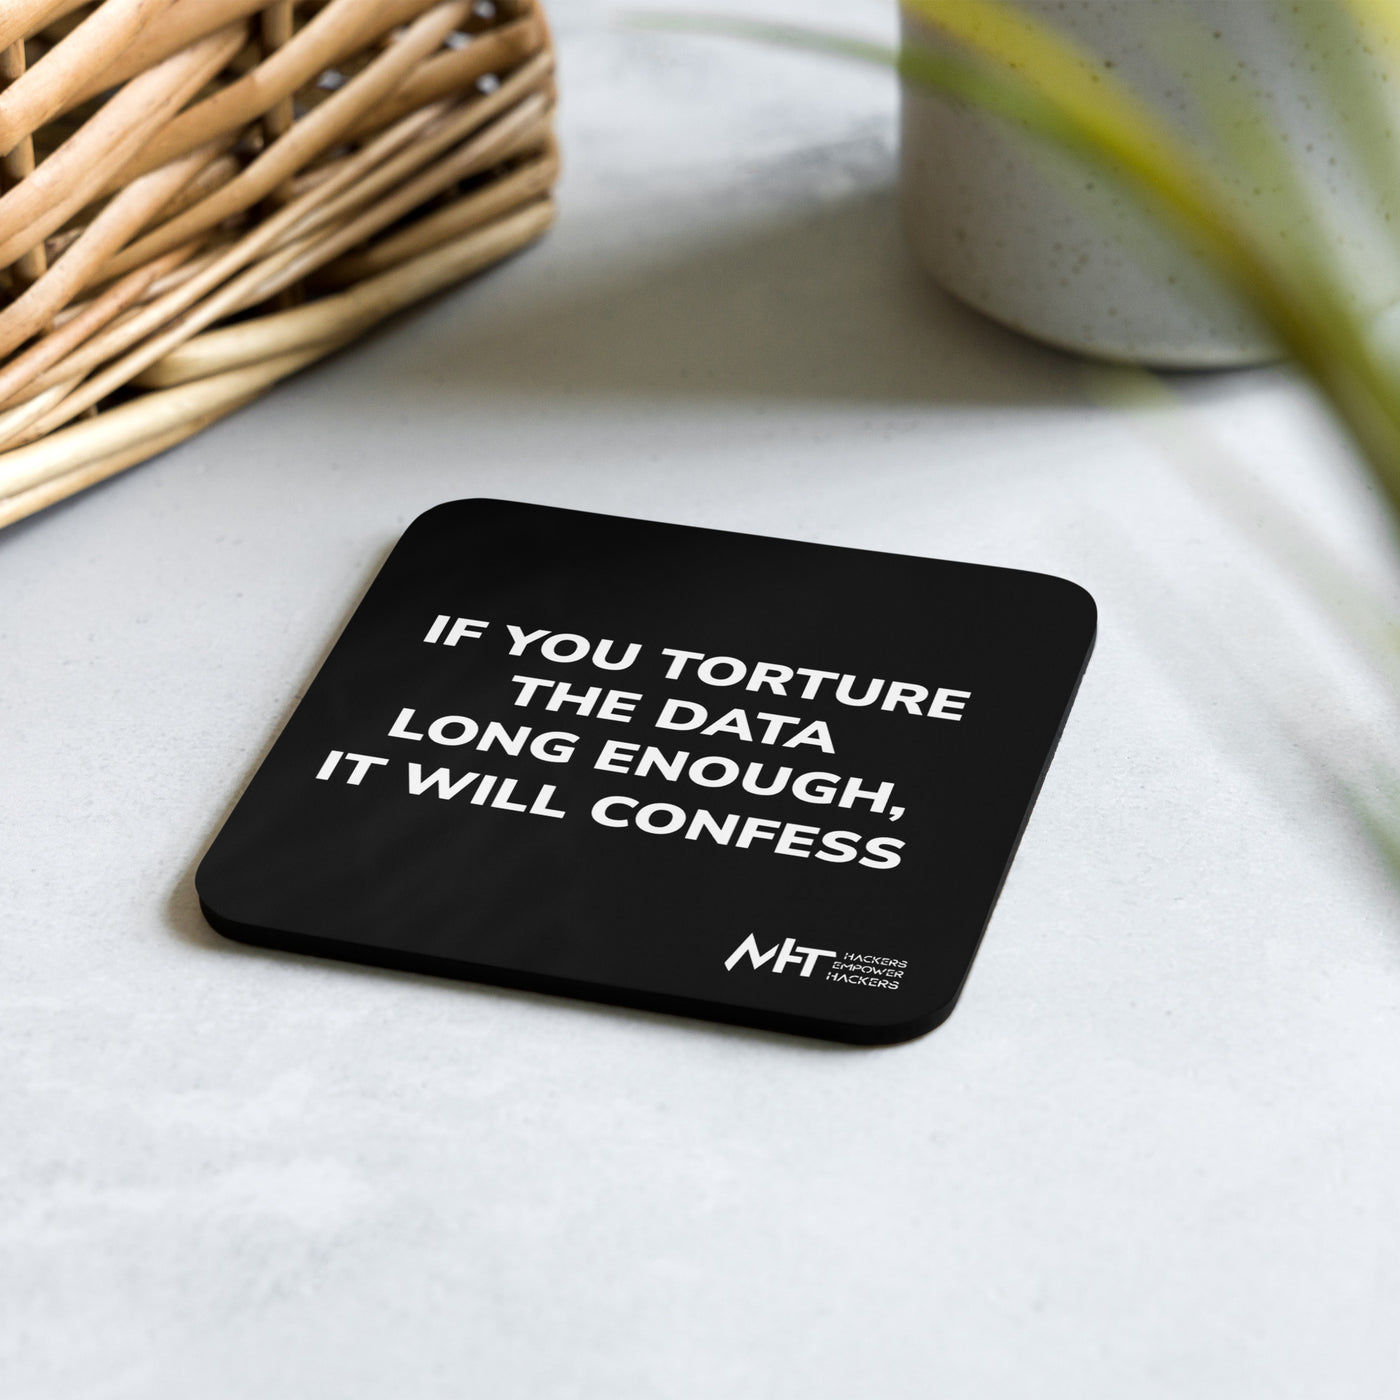 If you torture the data - Cork-back coaster